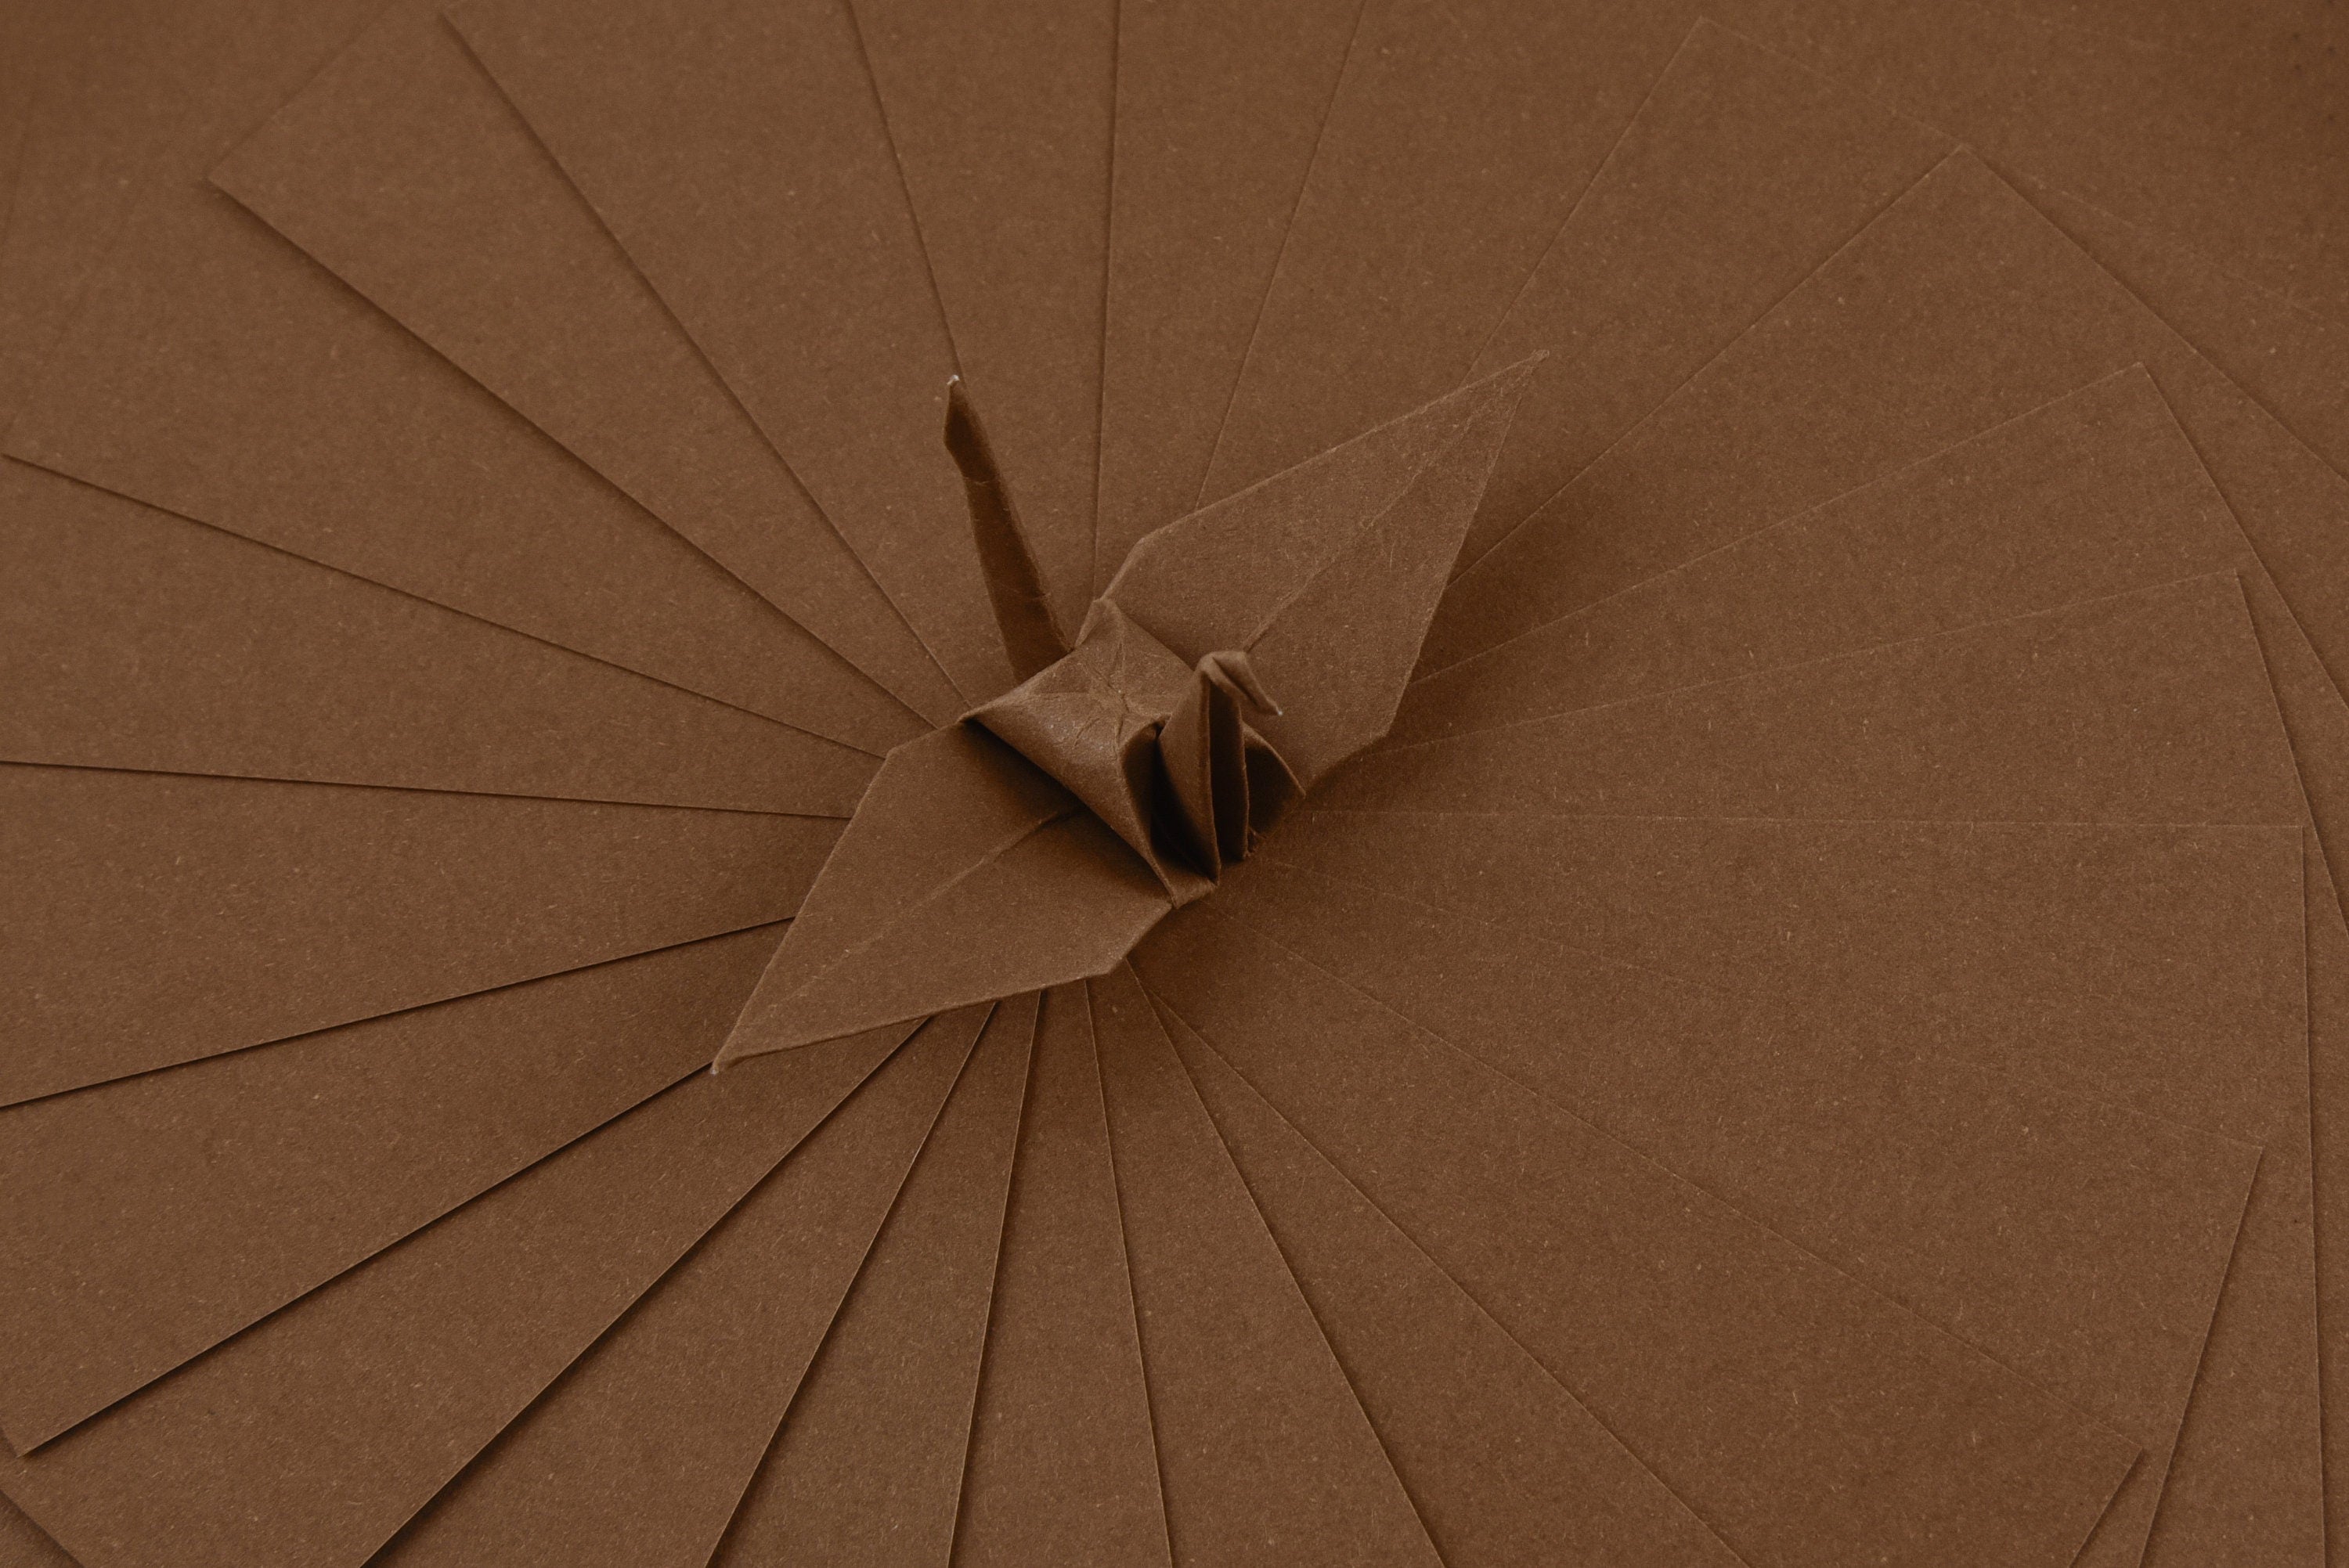 100 Brown Origami Paper Sheets 3x3 inches Square Paper Pack for Folding, Origami Cranes, and Decoration - S07